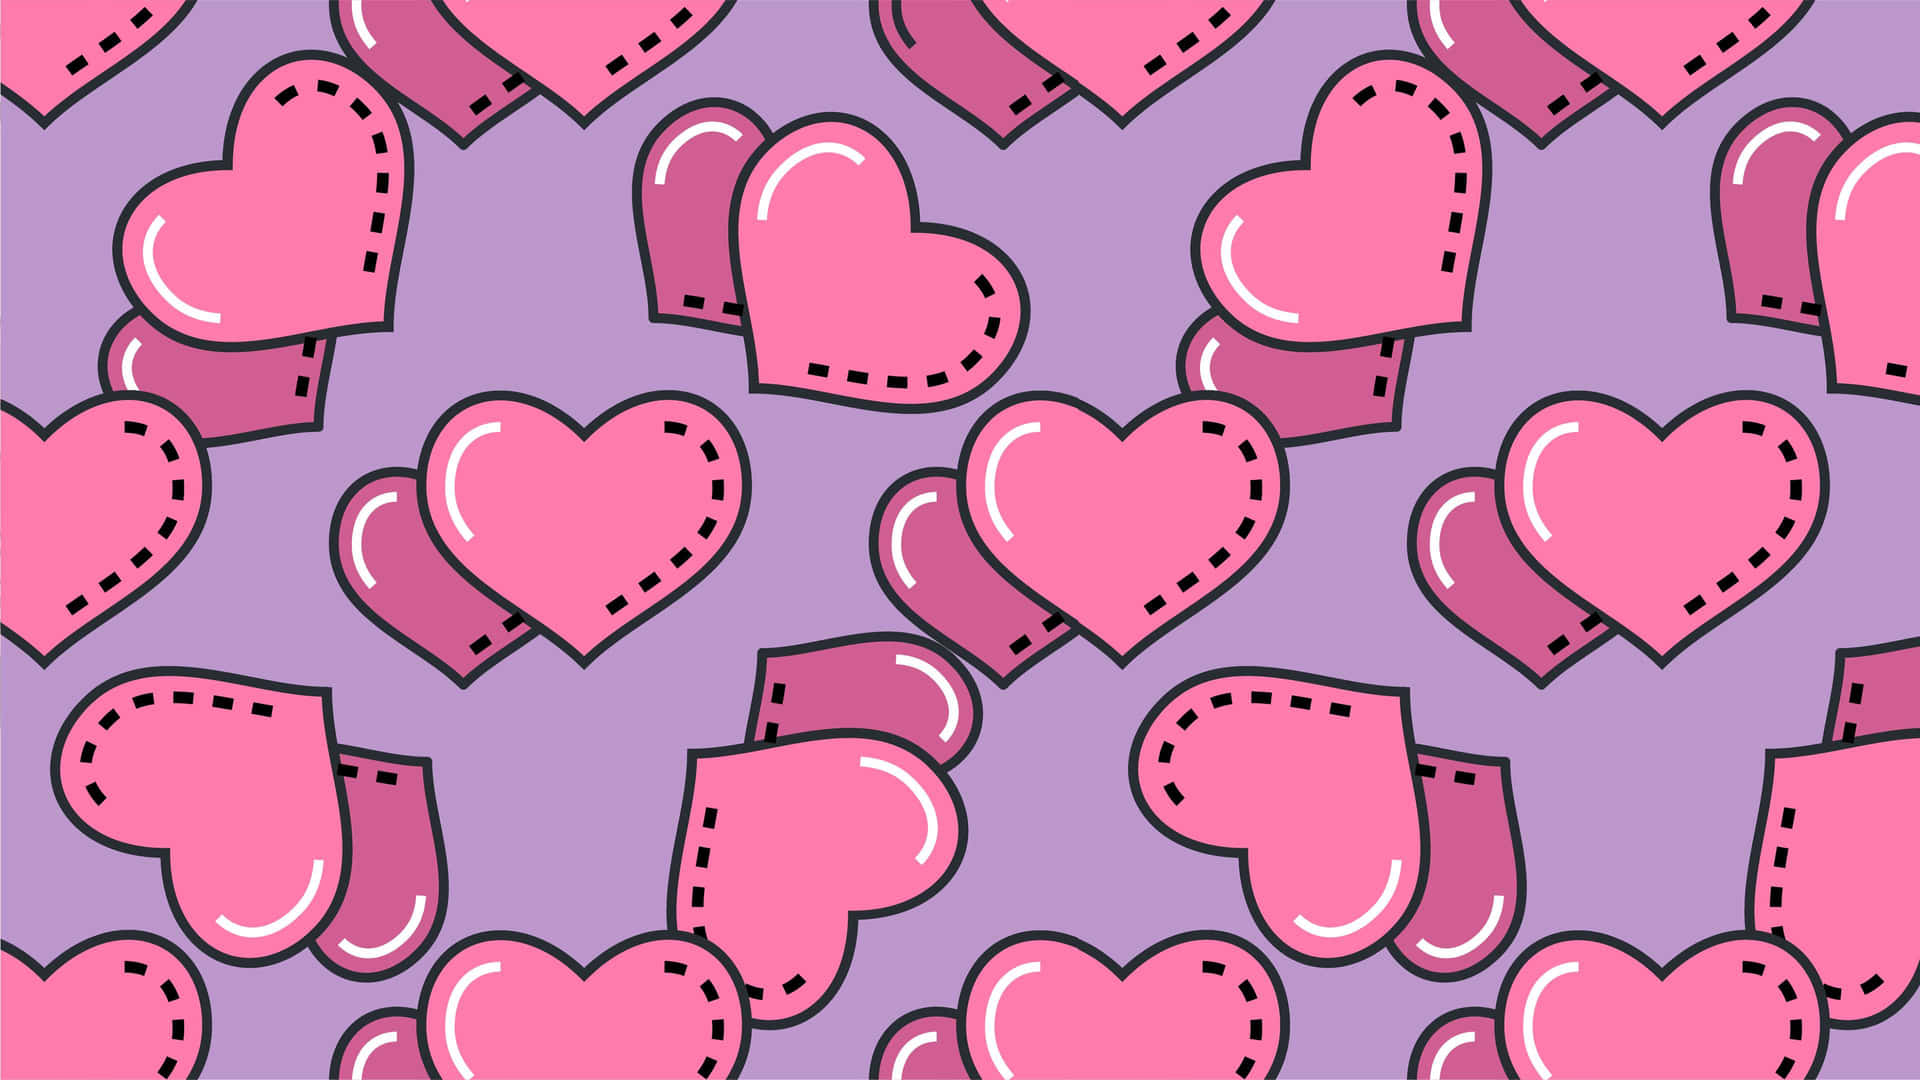 Tilted Pink Hearts Valentines Day Background